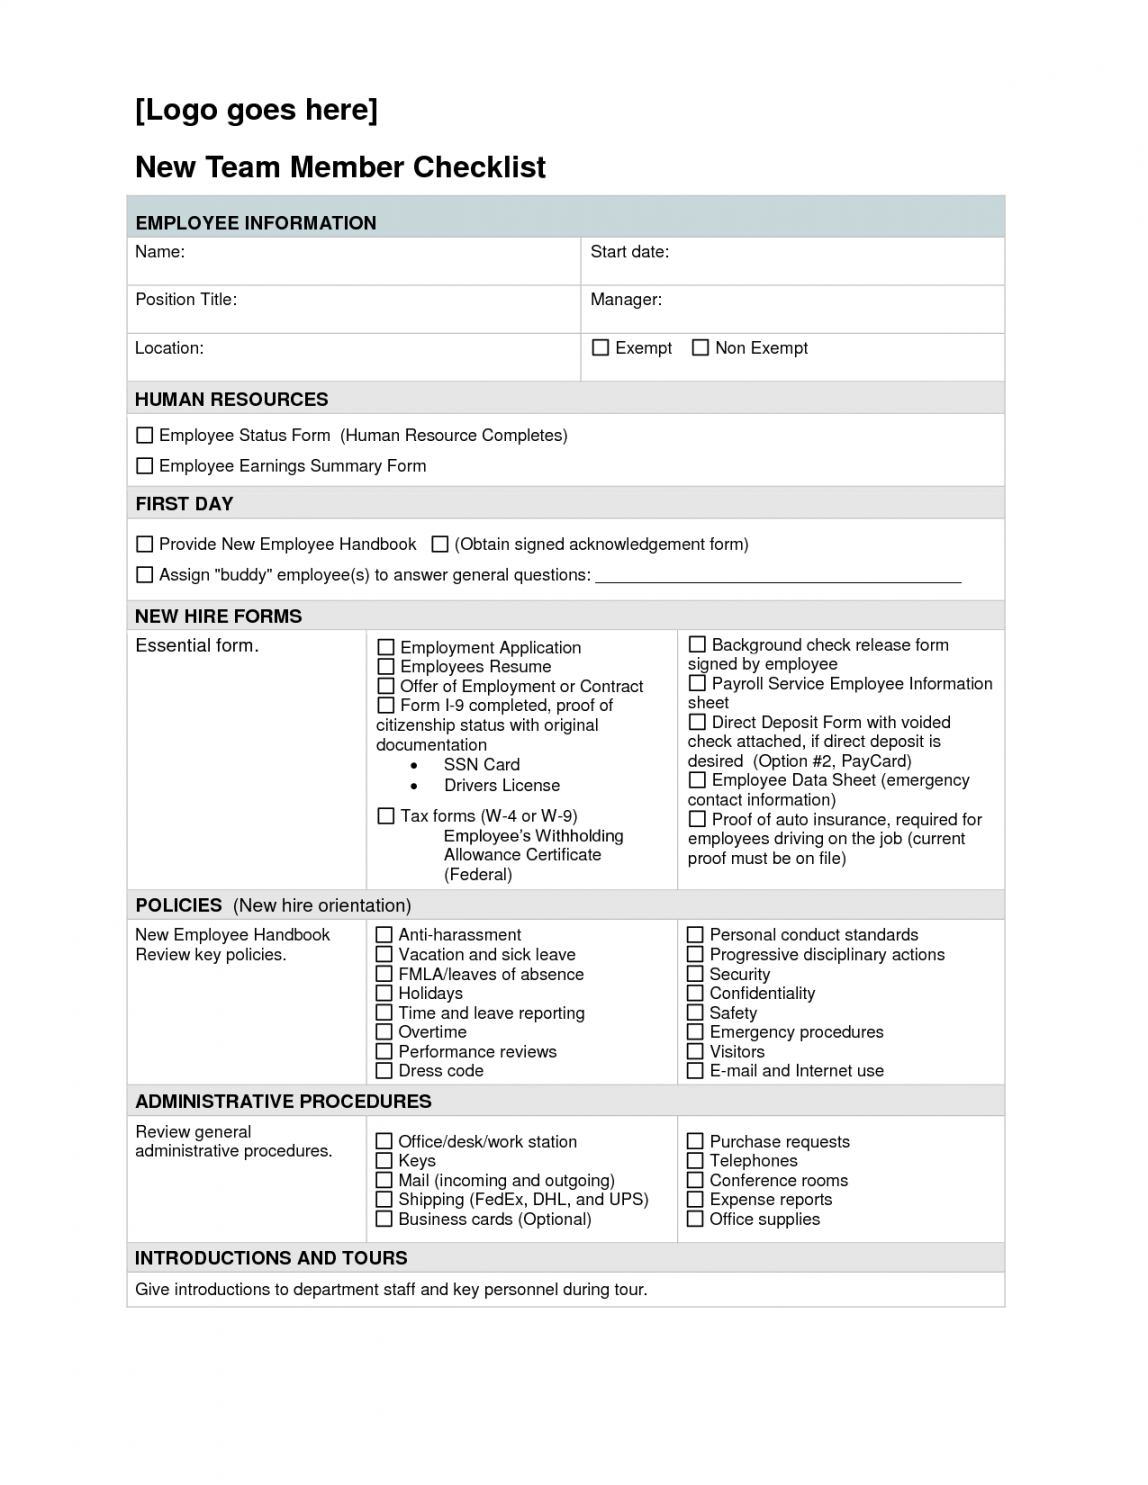 new hire checklist  full version  employee forms  onboarding new employee new hire checklist template